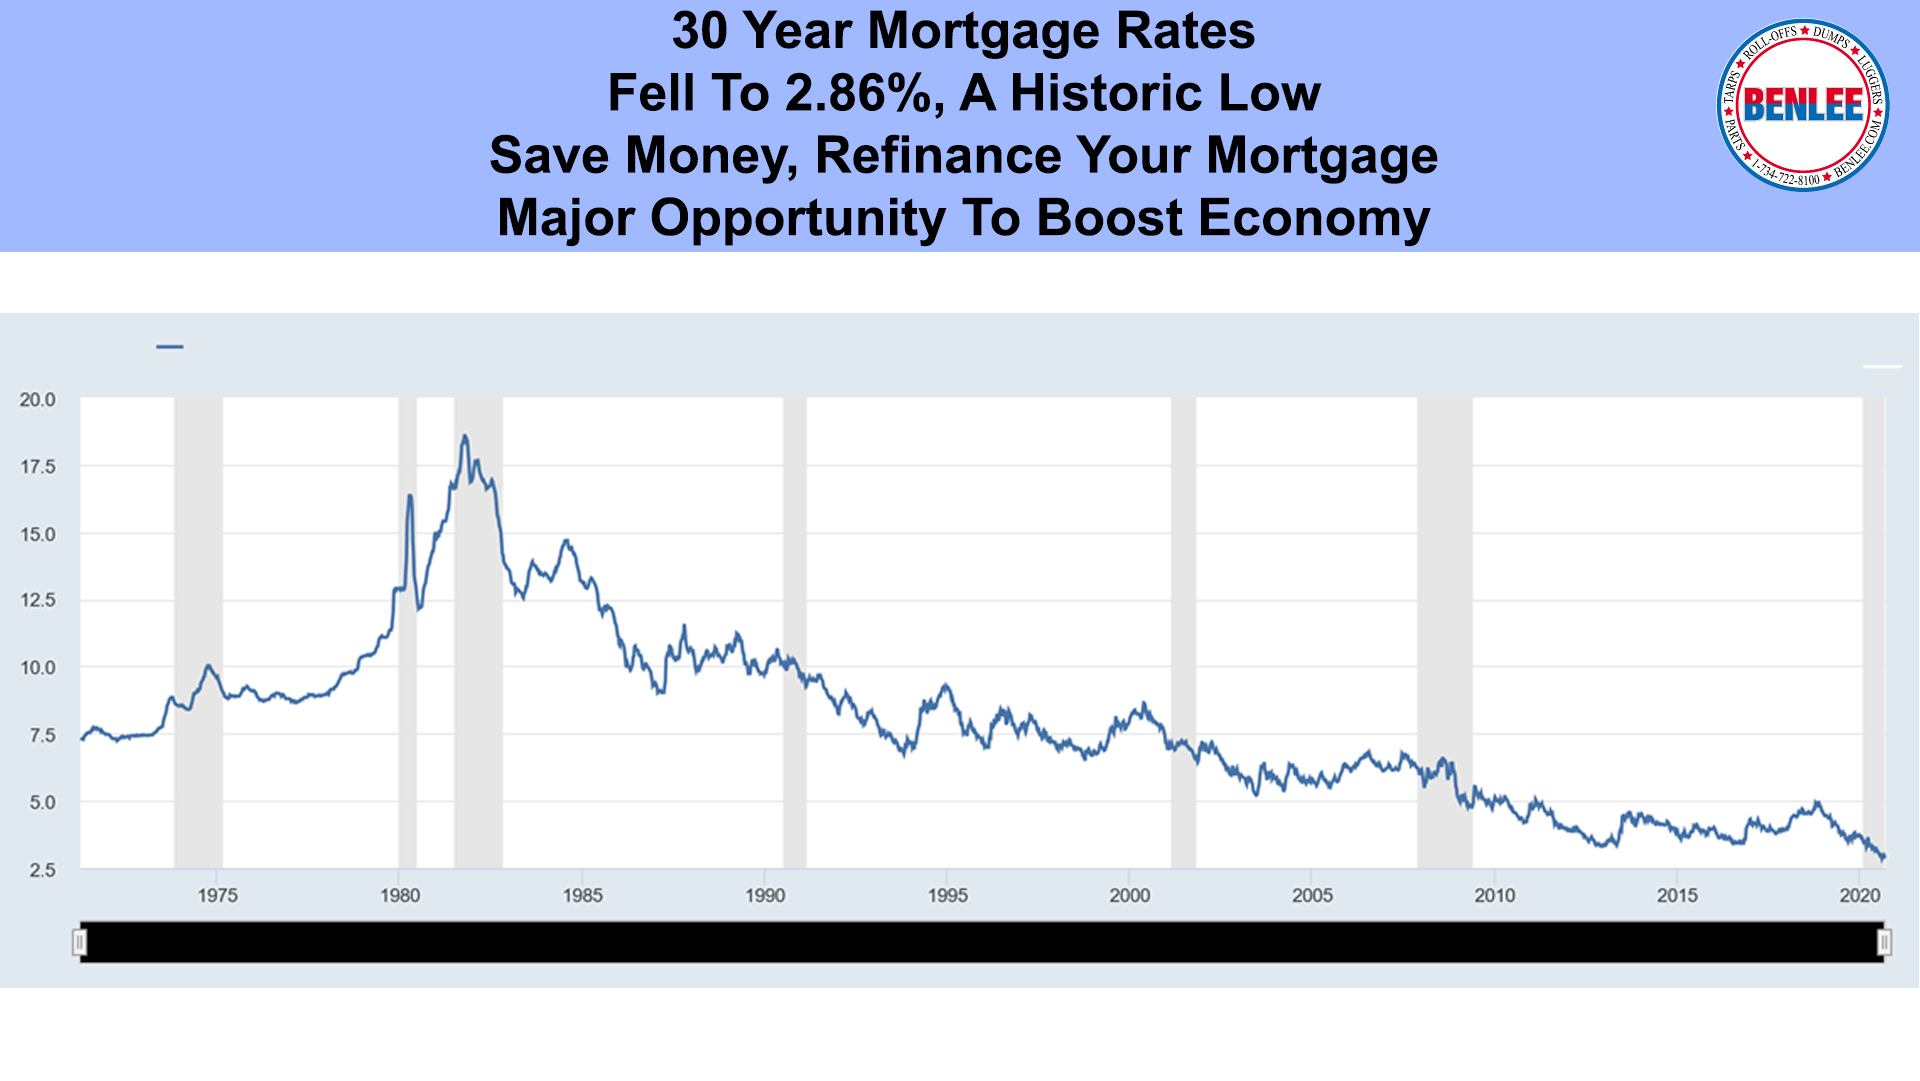 30 Year Mortgage Rates